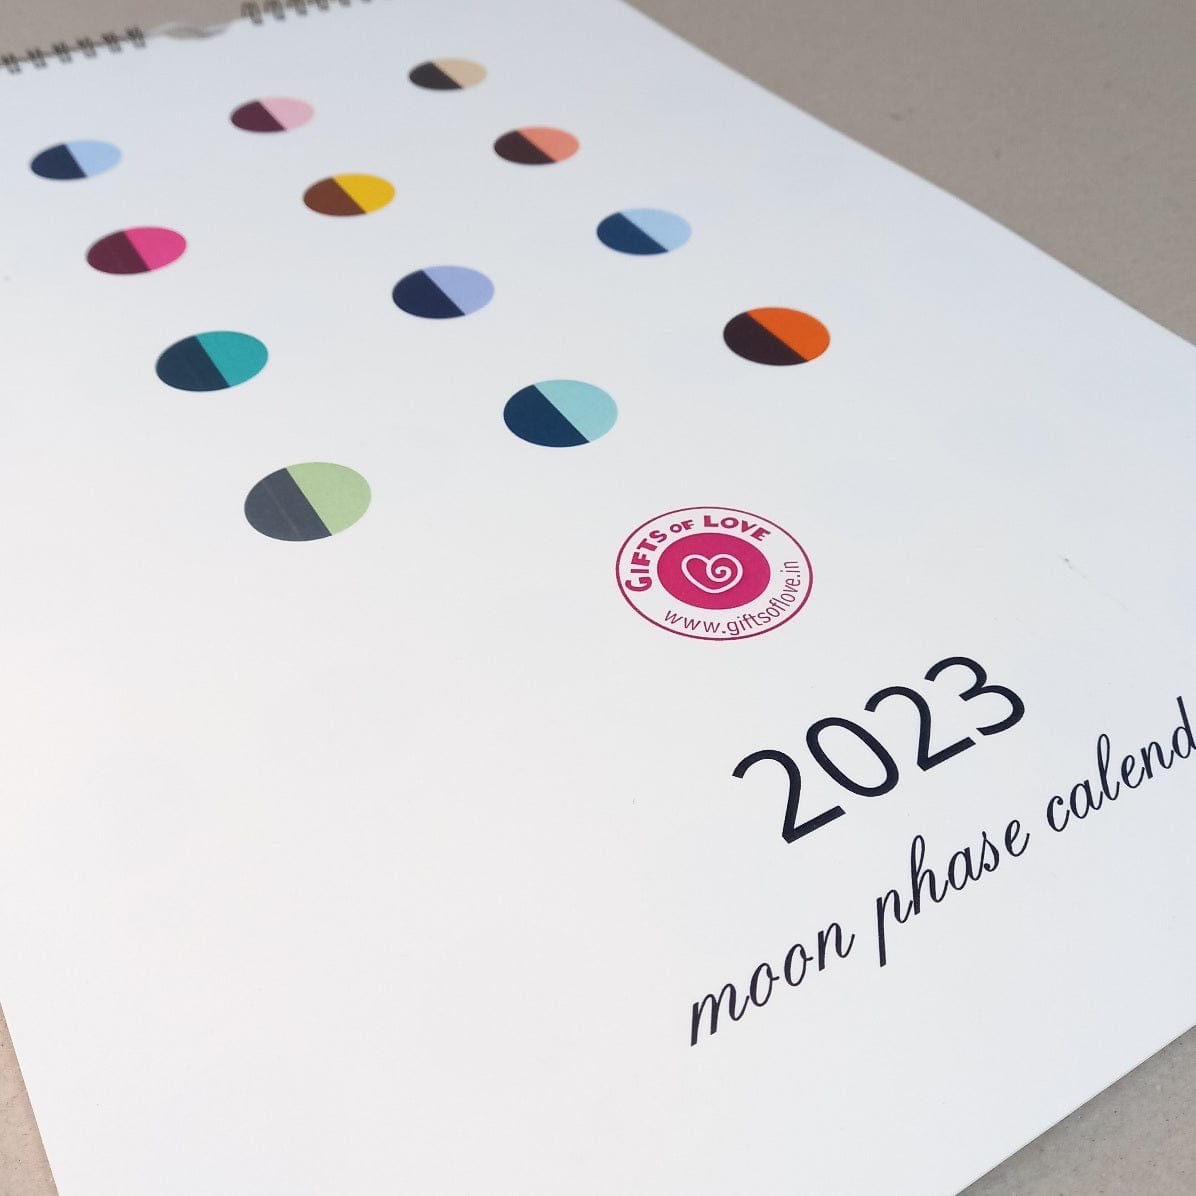 Gifts of Love 2023 Moon Phase Wall Calendar